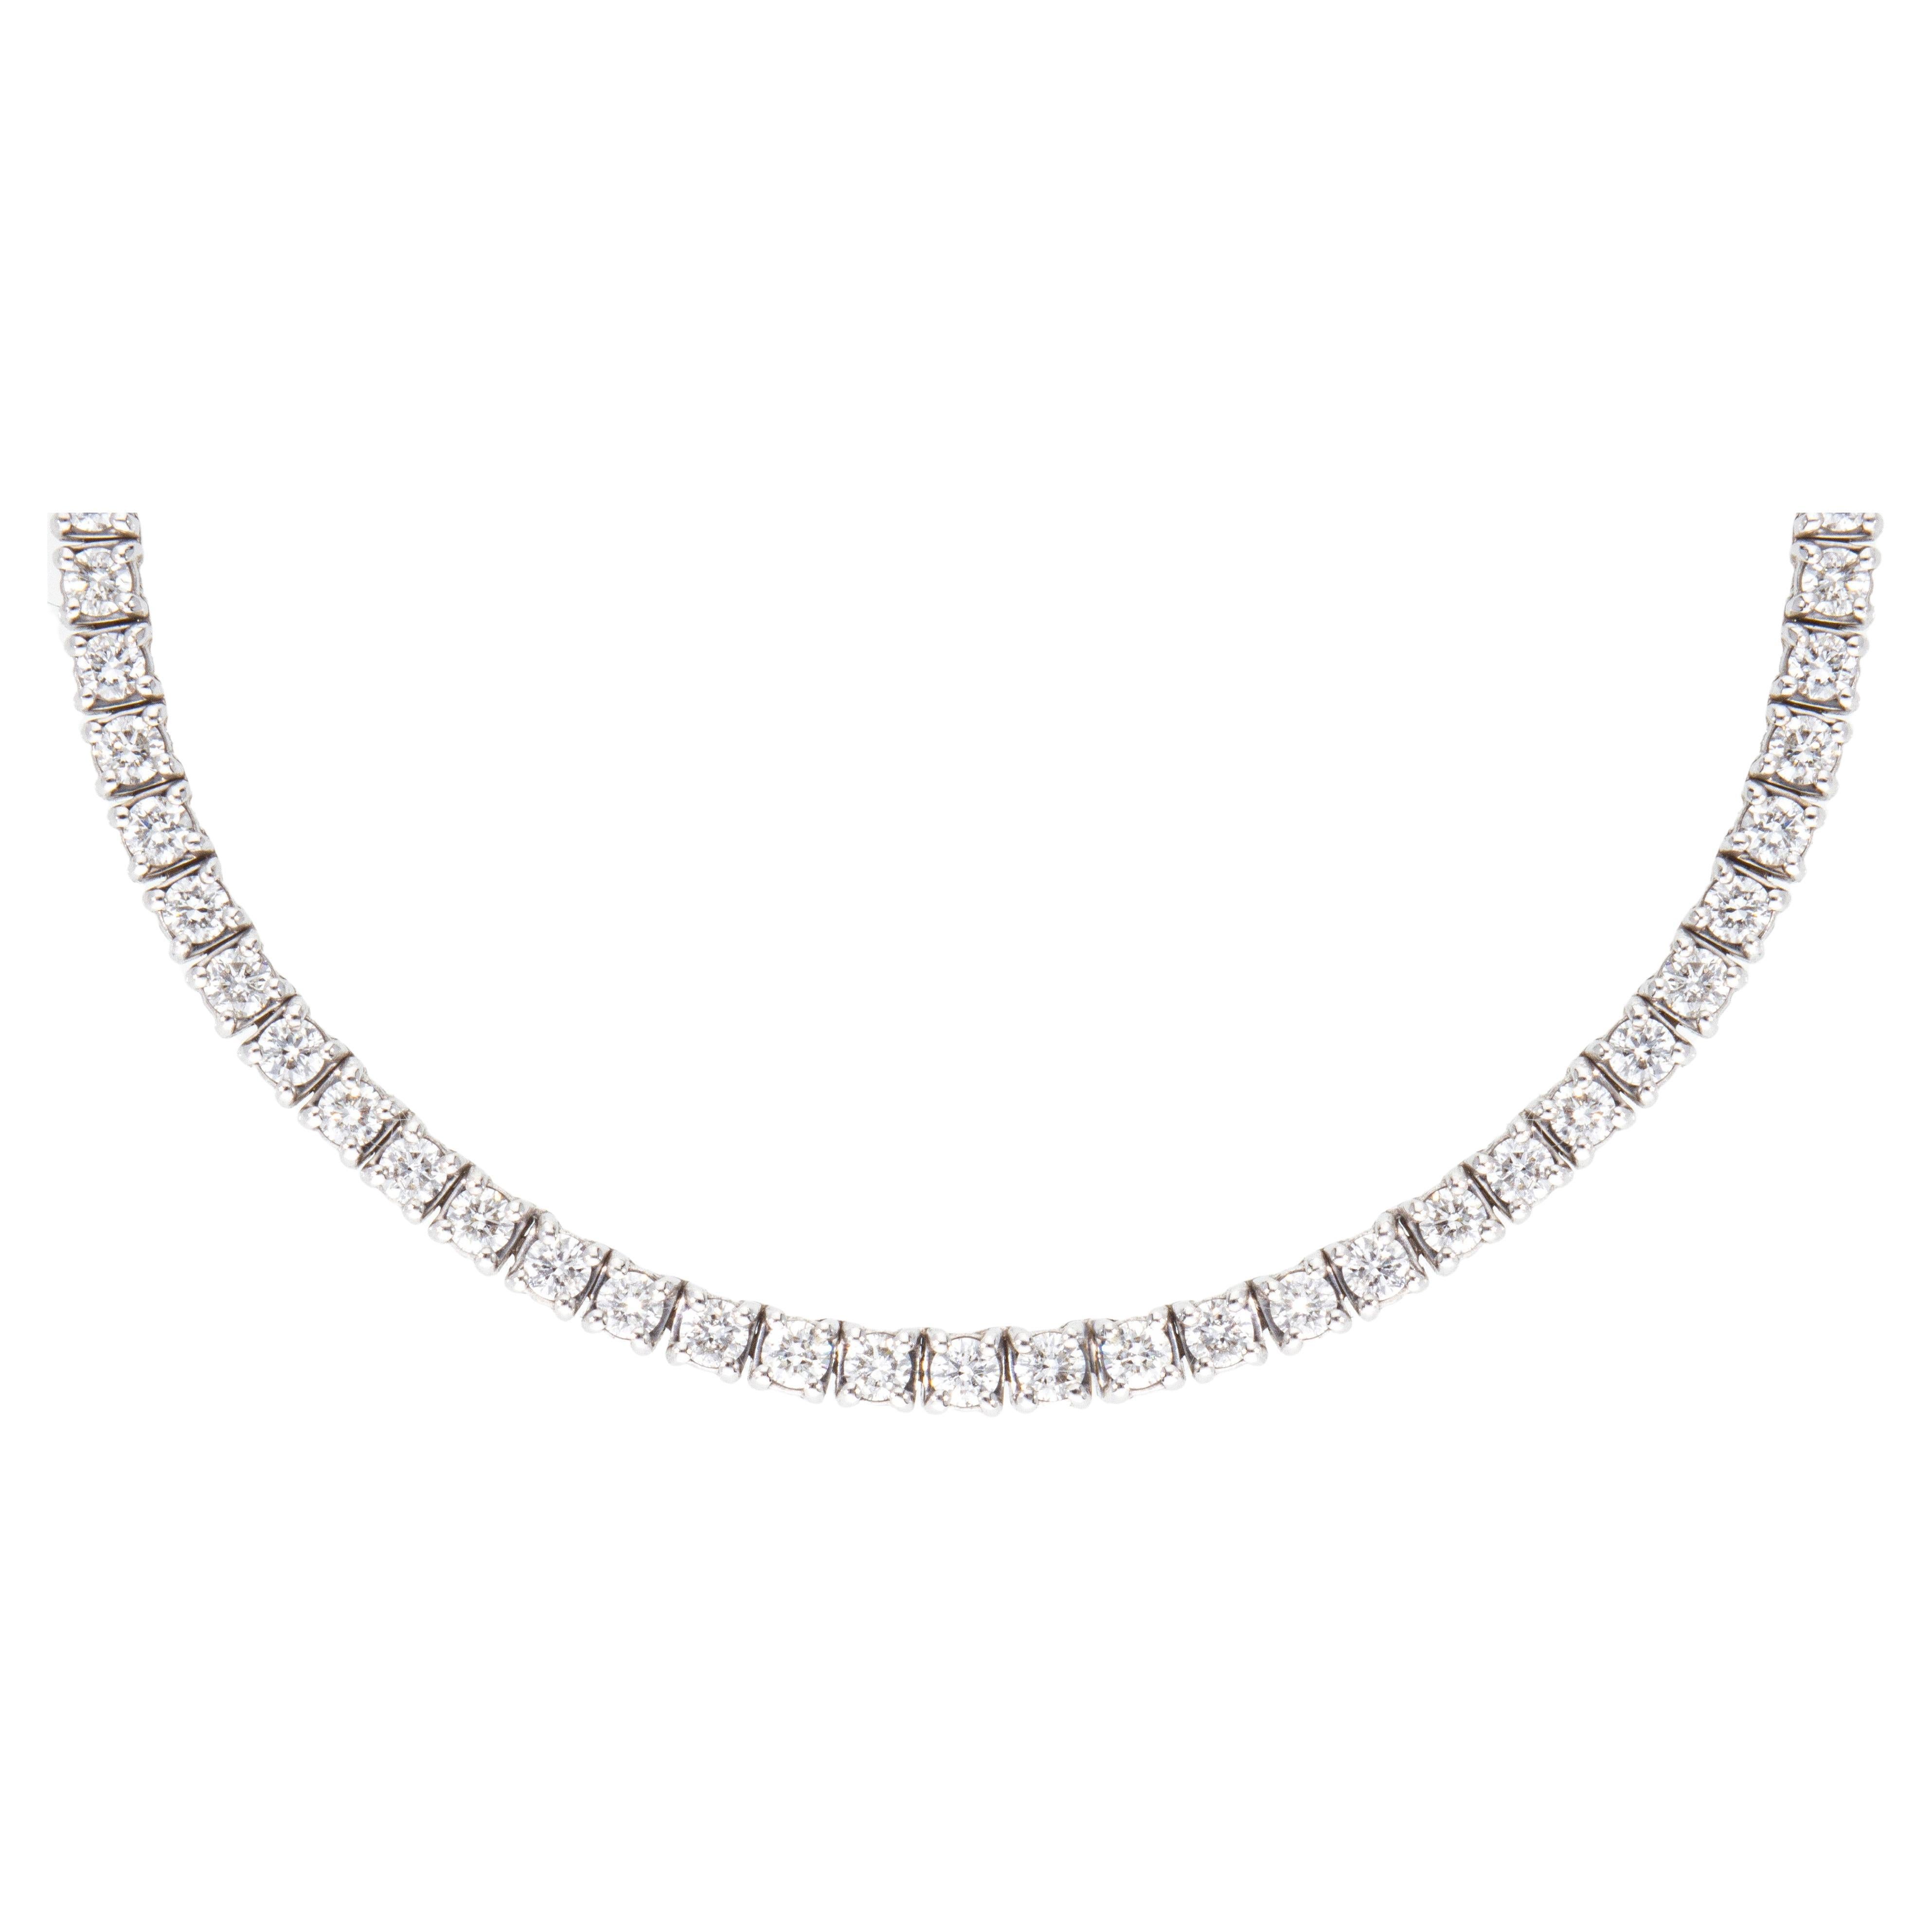 Necklace with 154 Brilliant Cut Diamonds, Total Carat Weight Ct 4.41